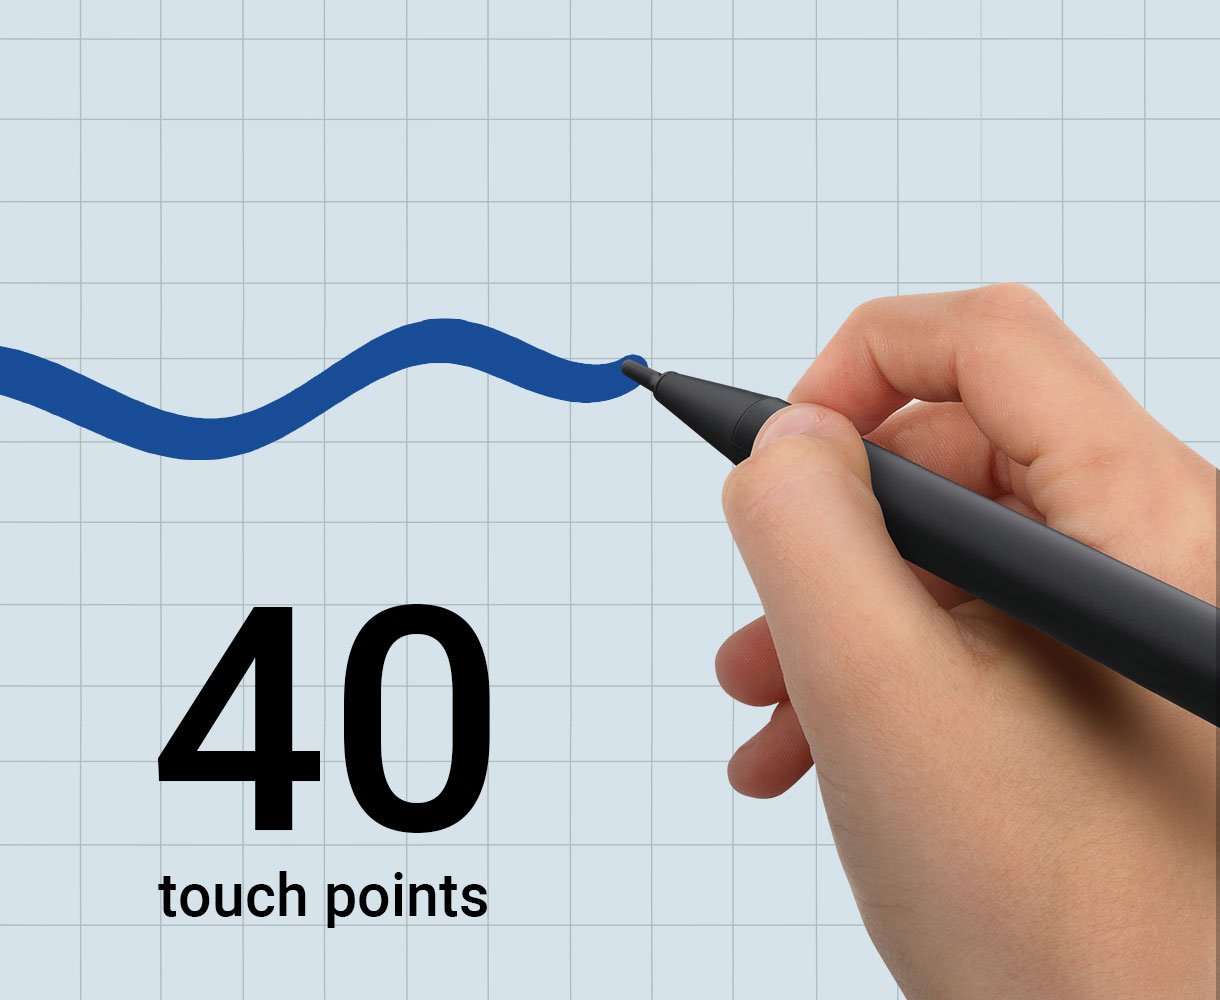 BenQ Board Essential Series 40 touch points